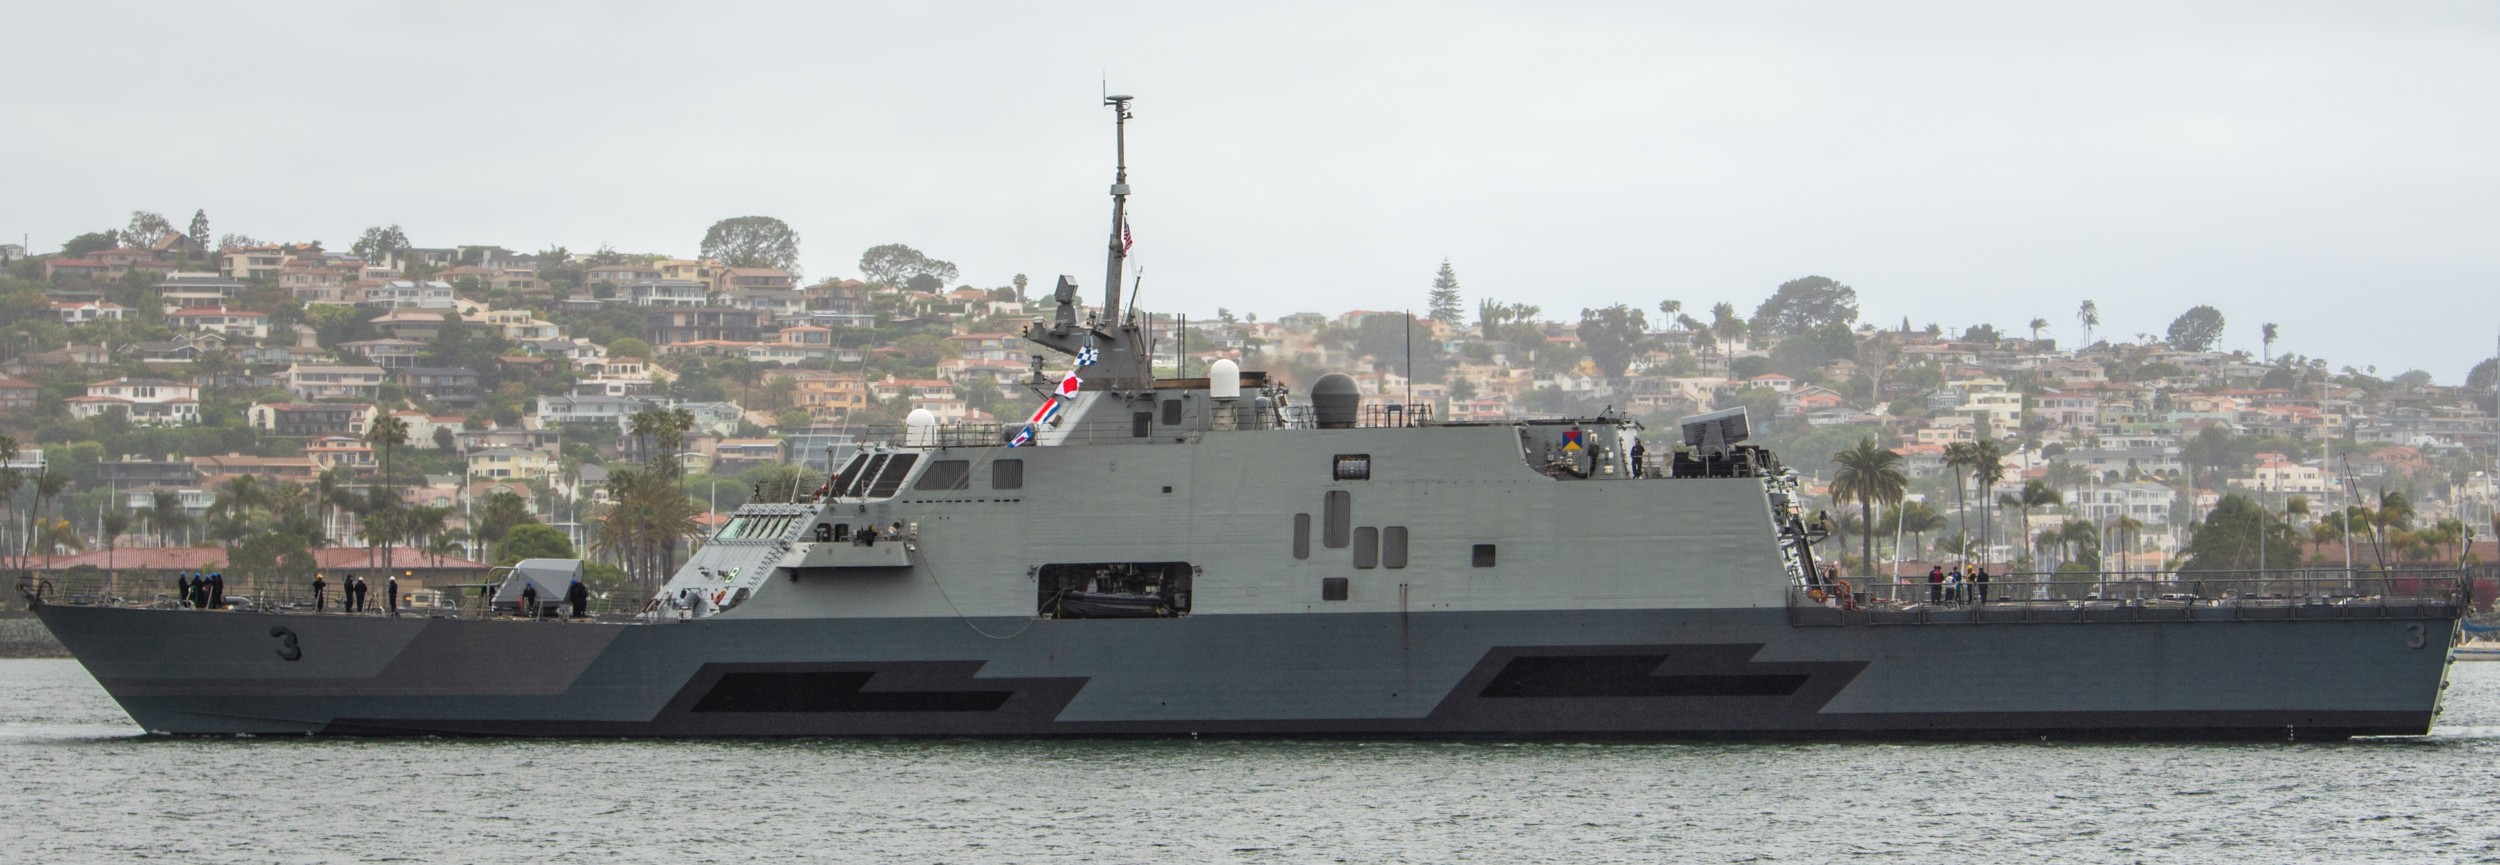 lcs-3 uss fort worth freedom class littoral combat ship us navy 79 san diego